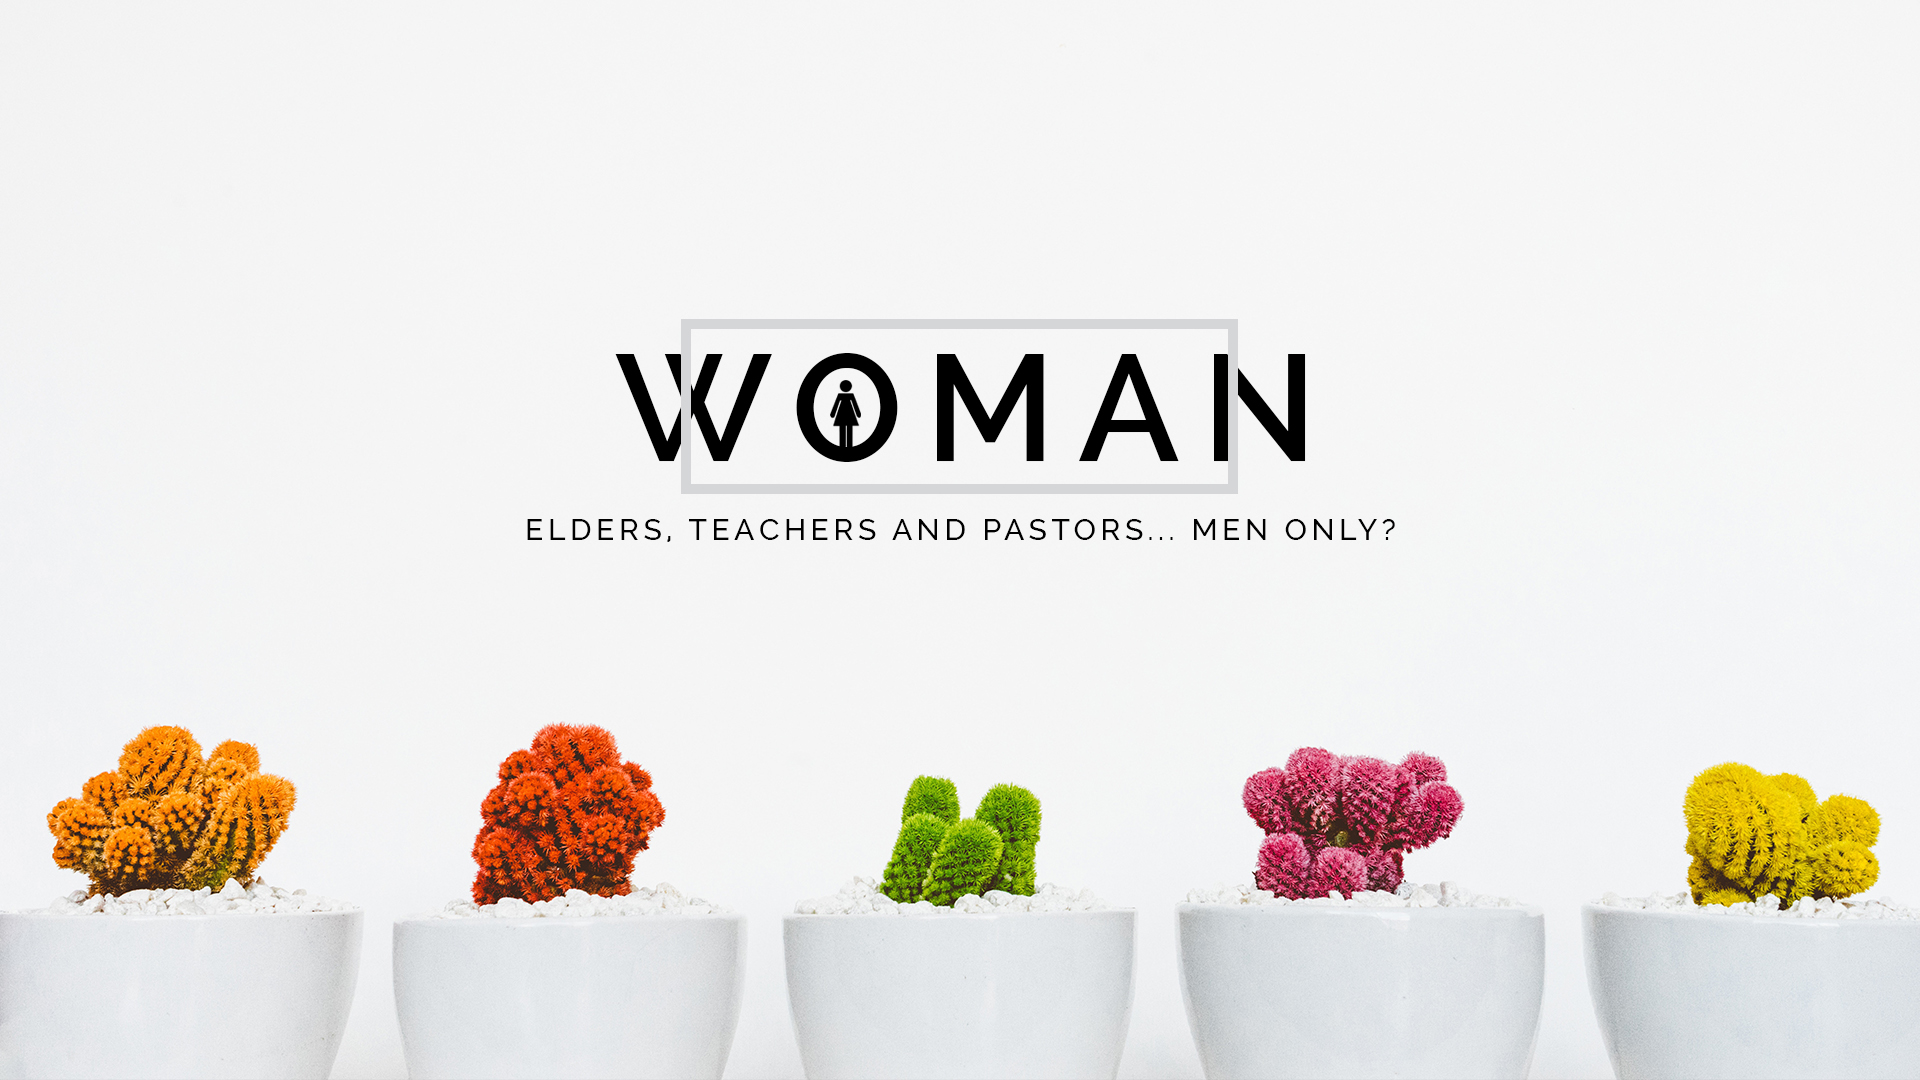 WOMAN - What does the Bible story have to say?